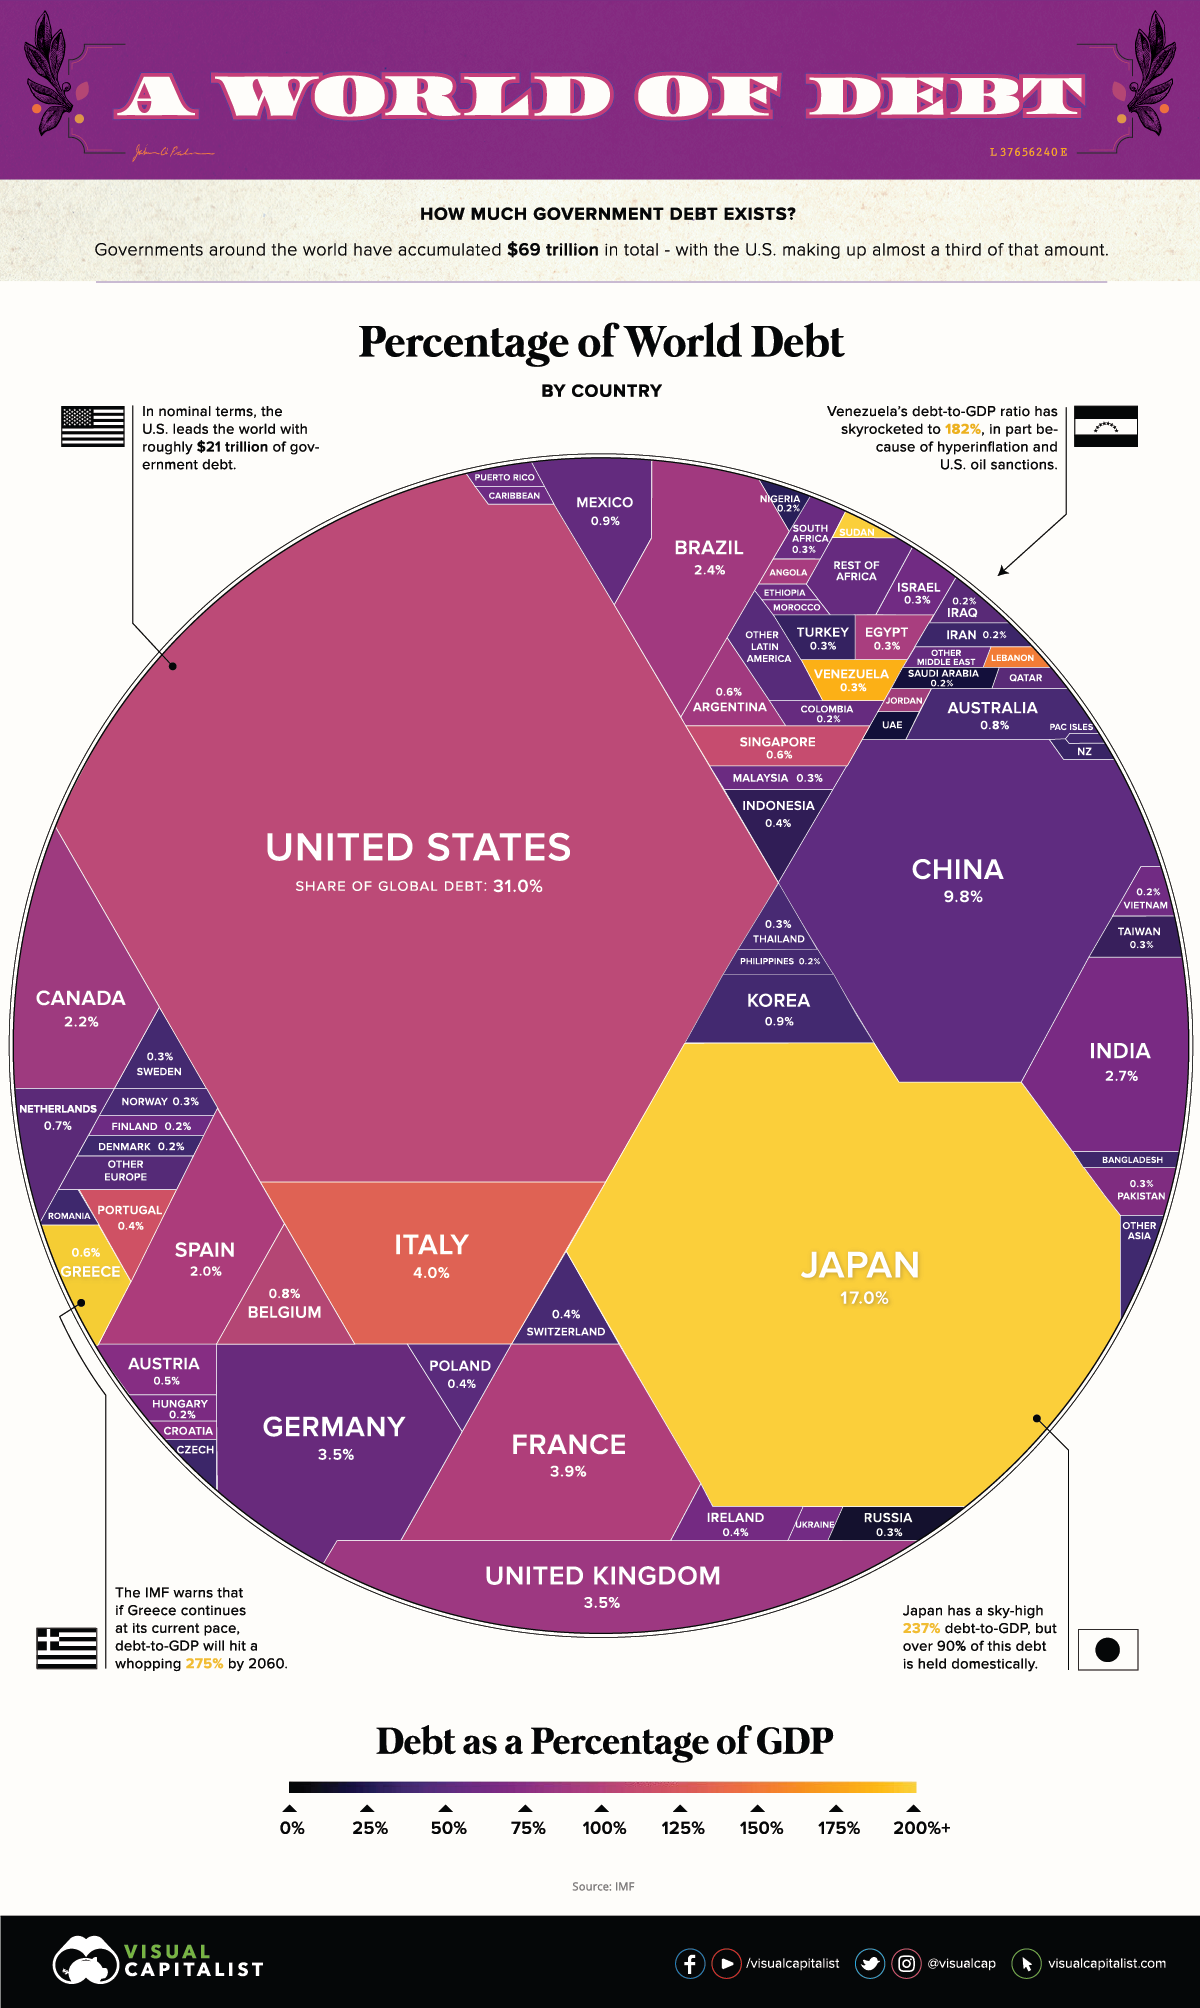 $69 Trillion of World Debt in One Infographic